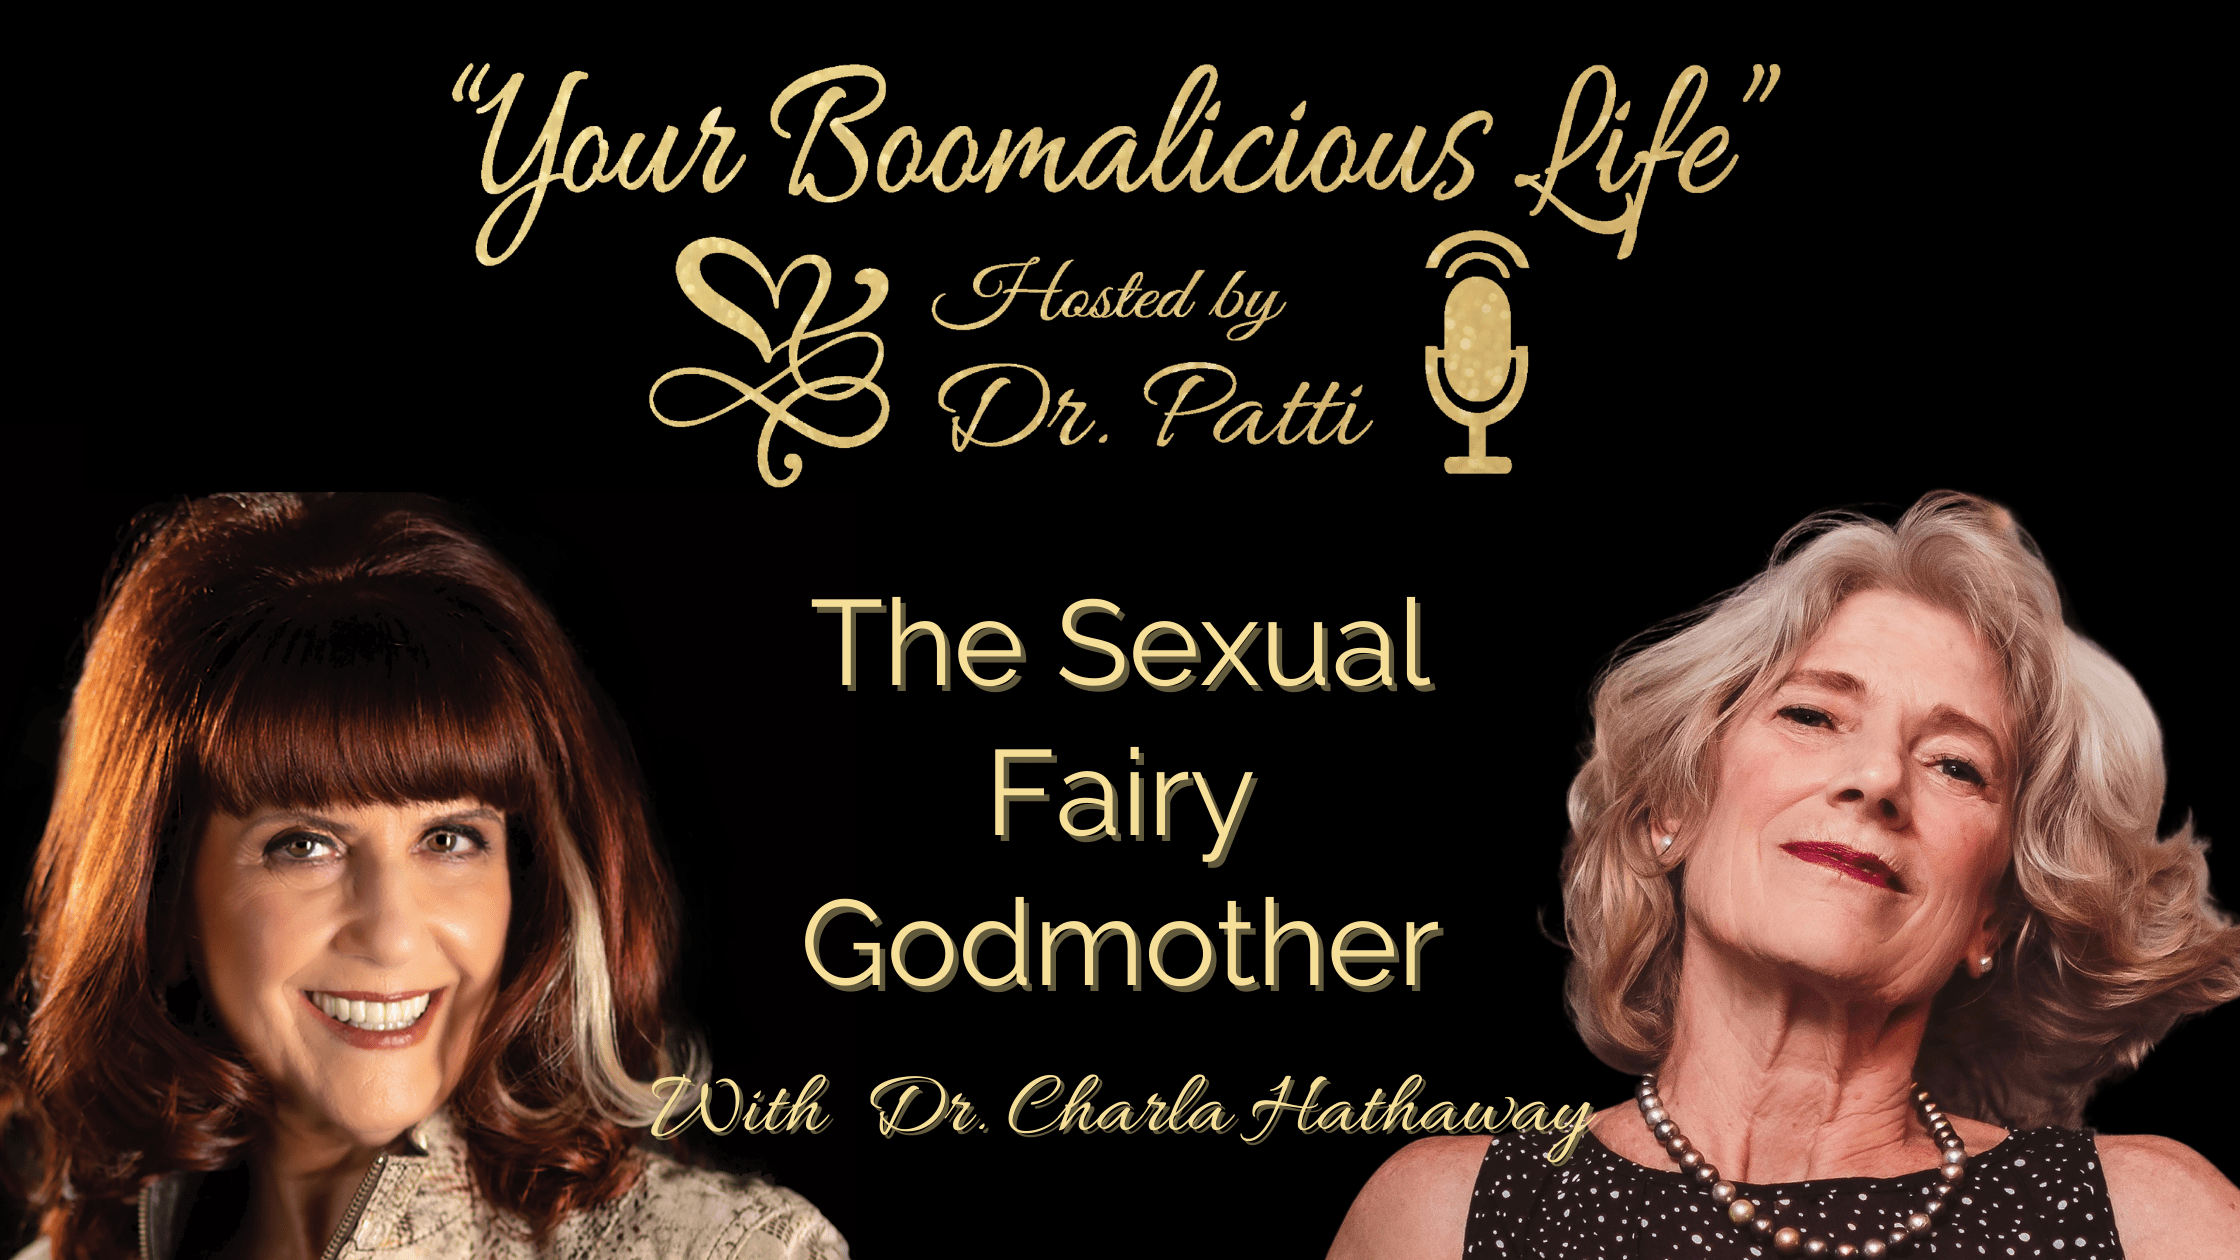 Episode 9 “The Sexual Fairy Godmother”